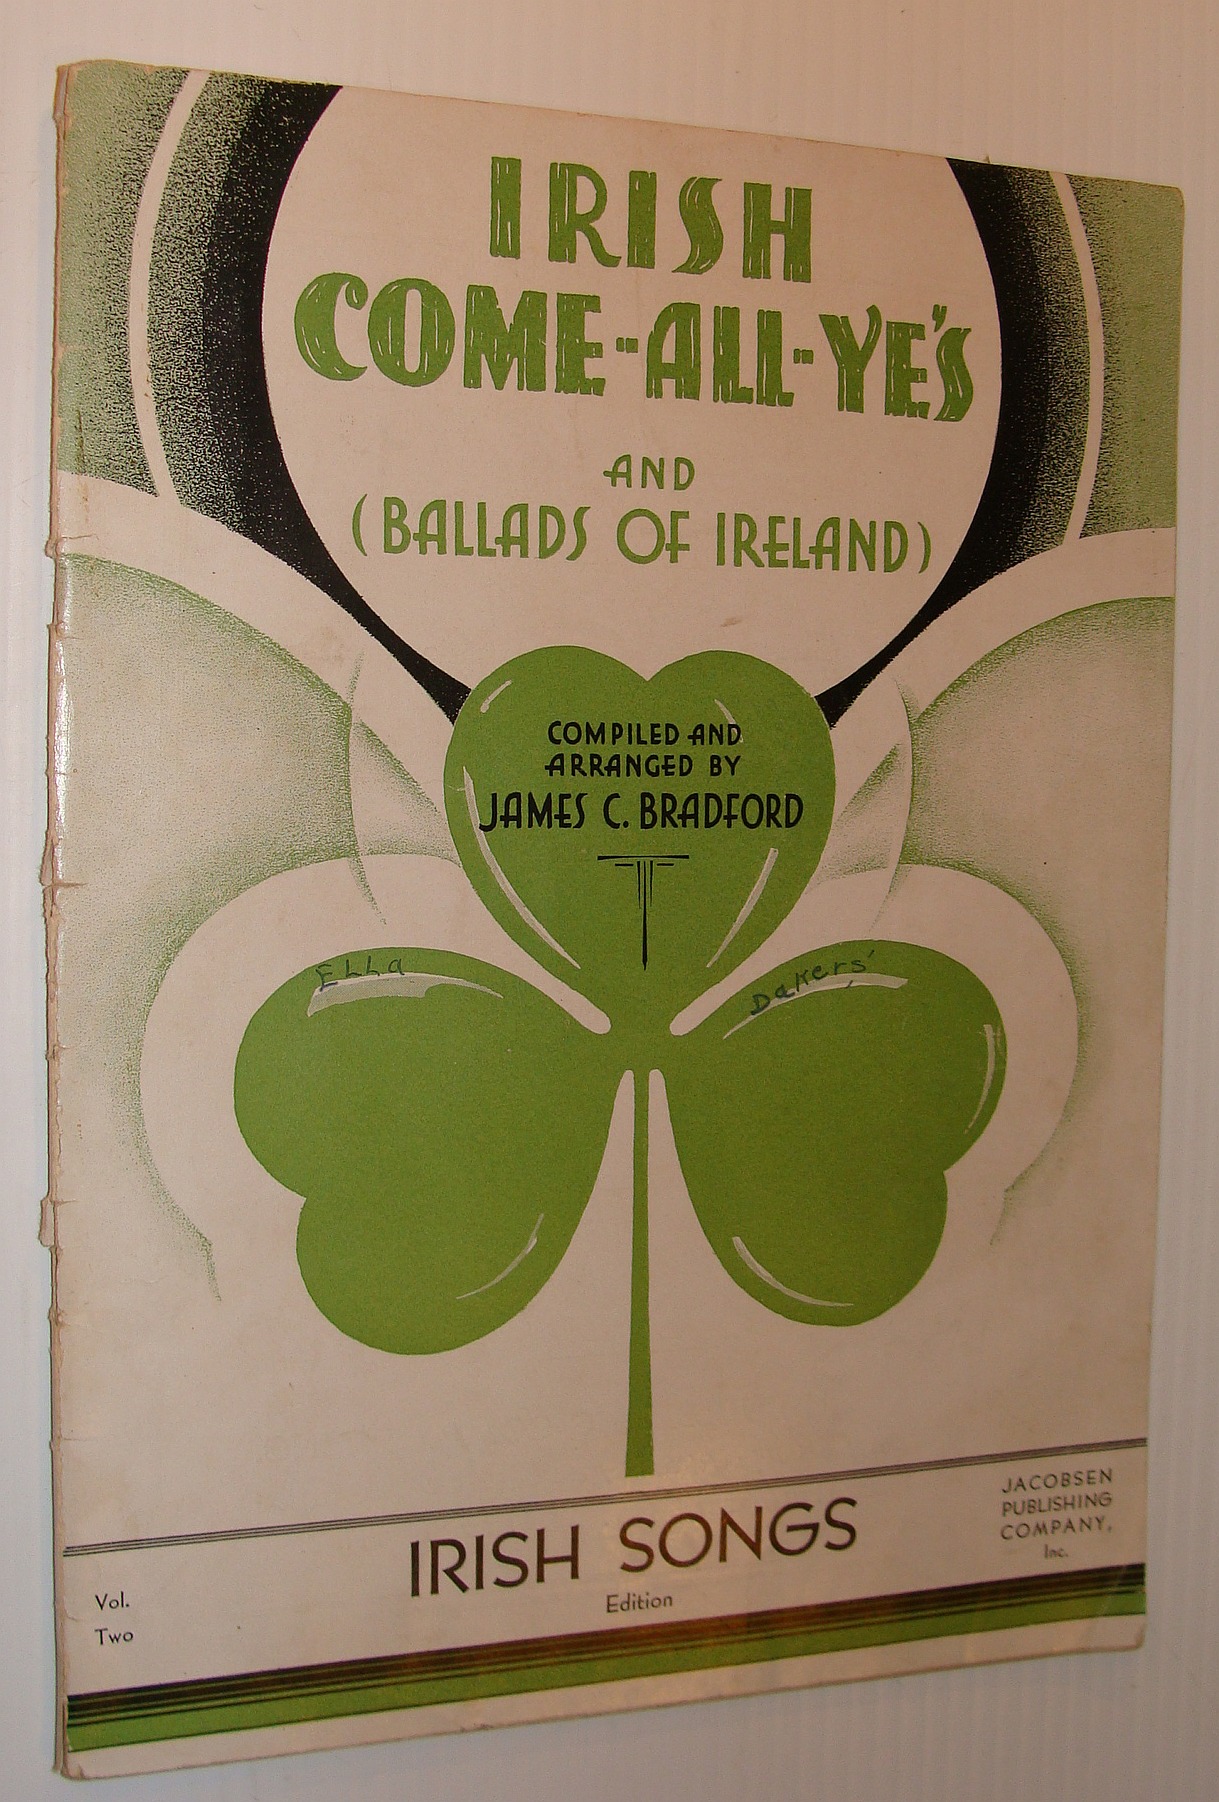 BRADFORD, JAMES C.: COMPILER AND ARRANGER - Irish Come-All-Ye's: A Collection of Popular Song Classics - Sheet Music with Lyrics